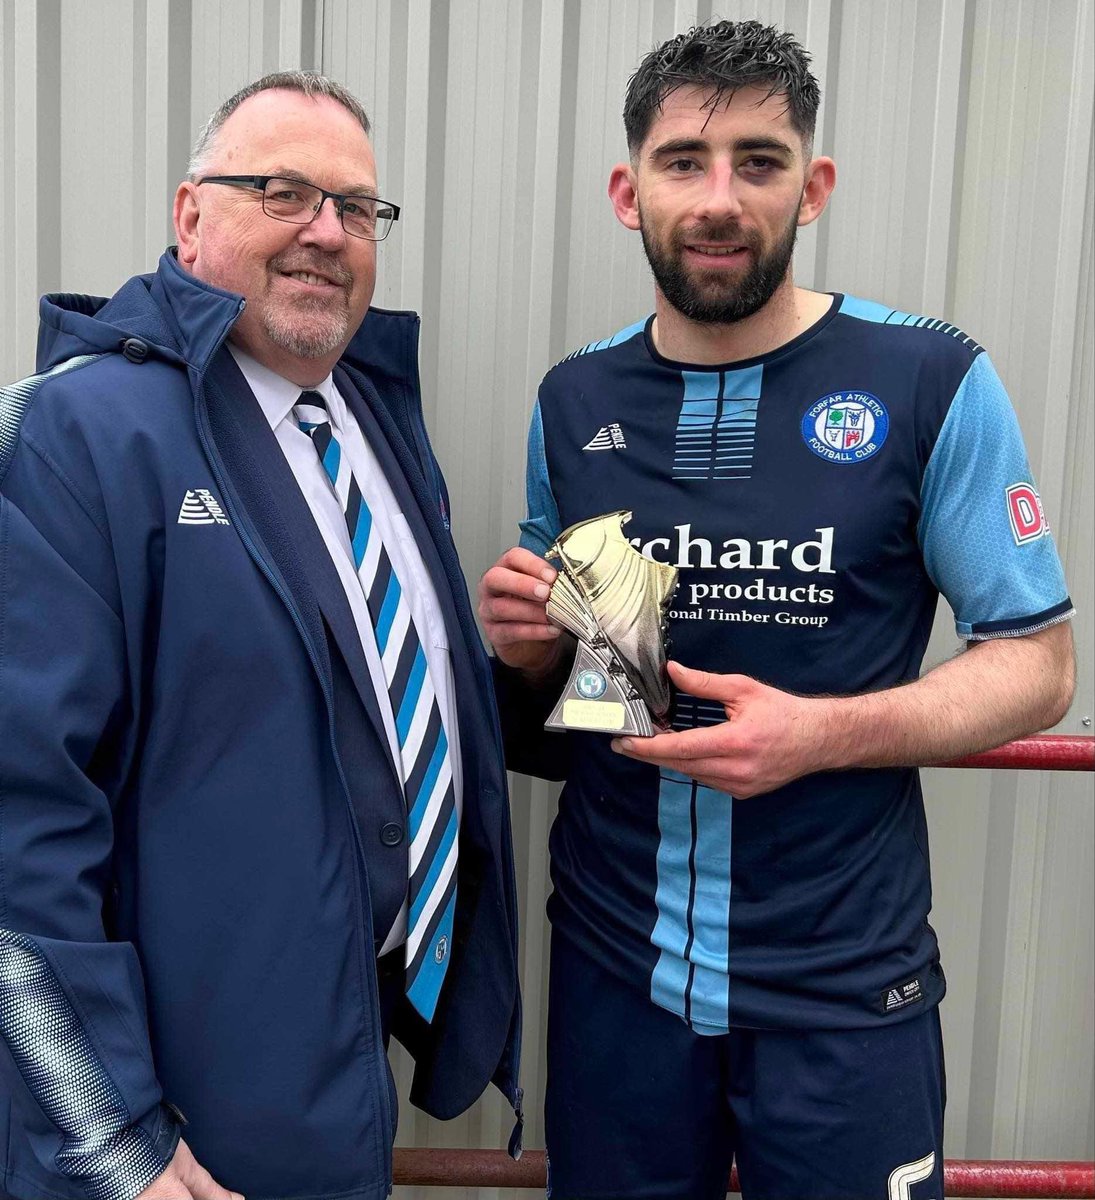 Stuart Morrison completed a clean sweep of awards as he was presented with the top goalscorer trophy following our final league game. The centre back ends the season with an impressive return of 10 goals.